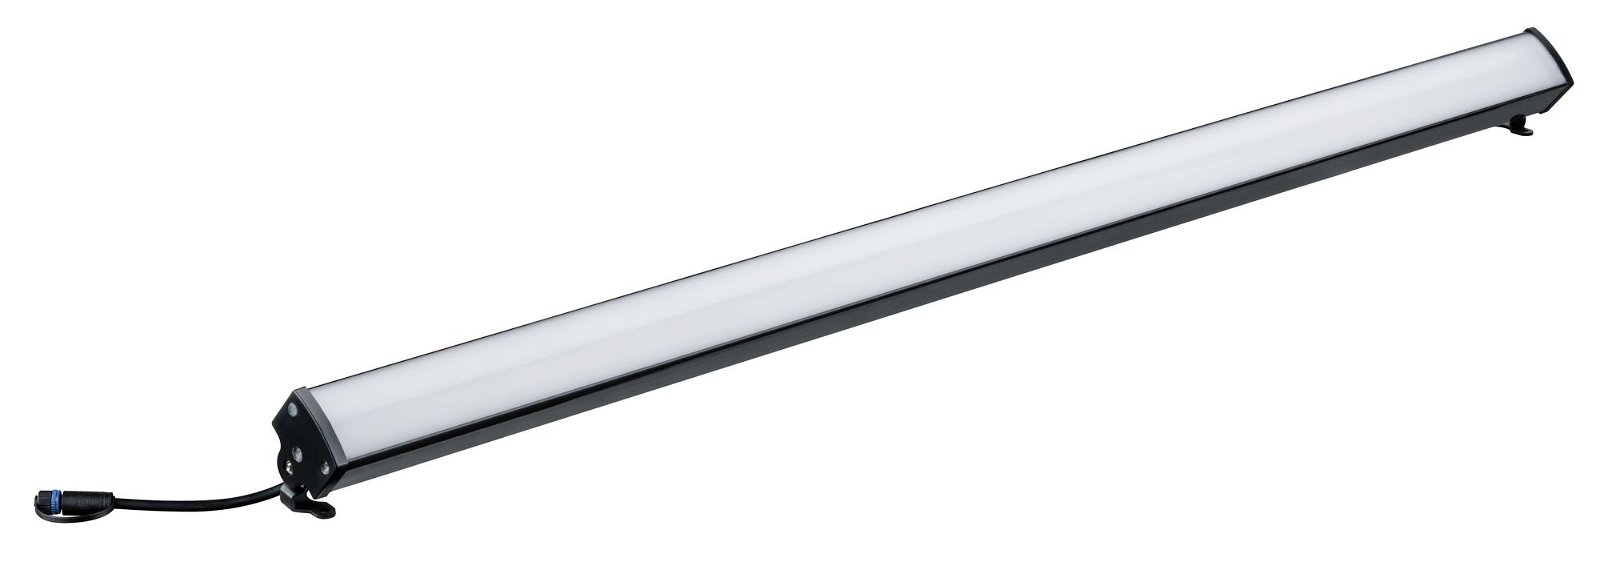 Plug & Shine LED Surface-mounted floor luminaire Surface-mounted light bar IP67 square 856x52mm 3000K 8W 660lm 24V Anthracite Die cast aluminium